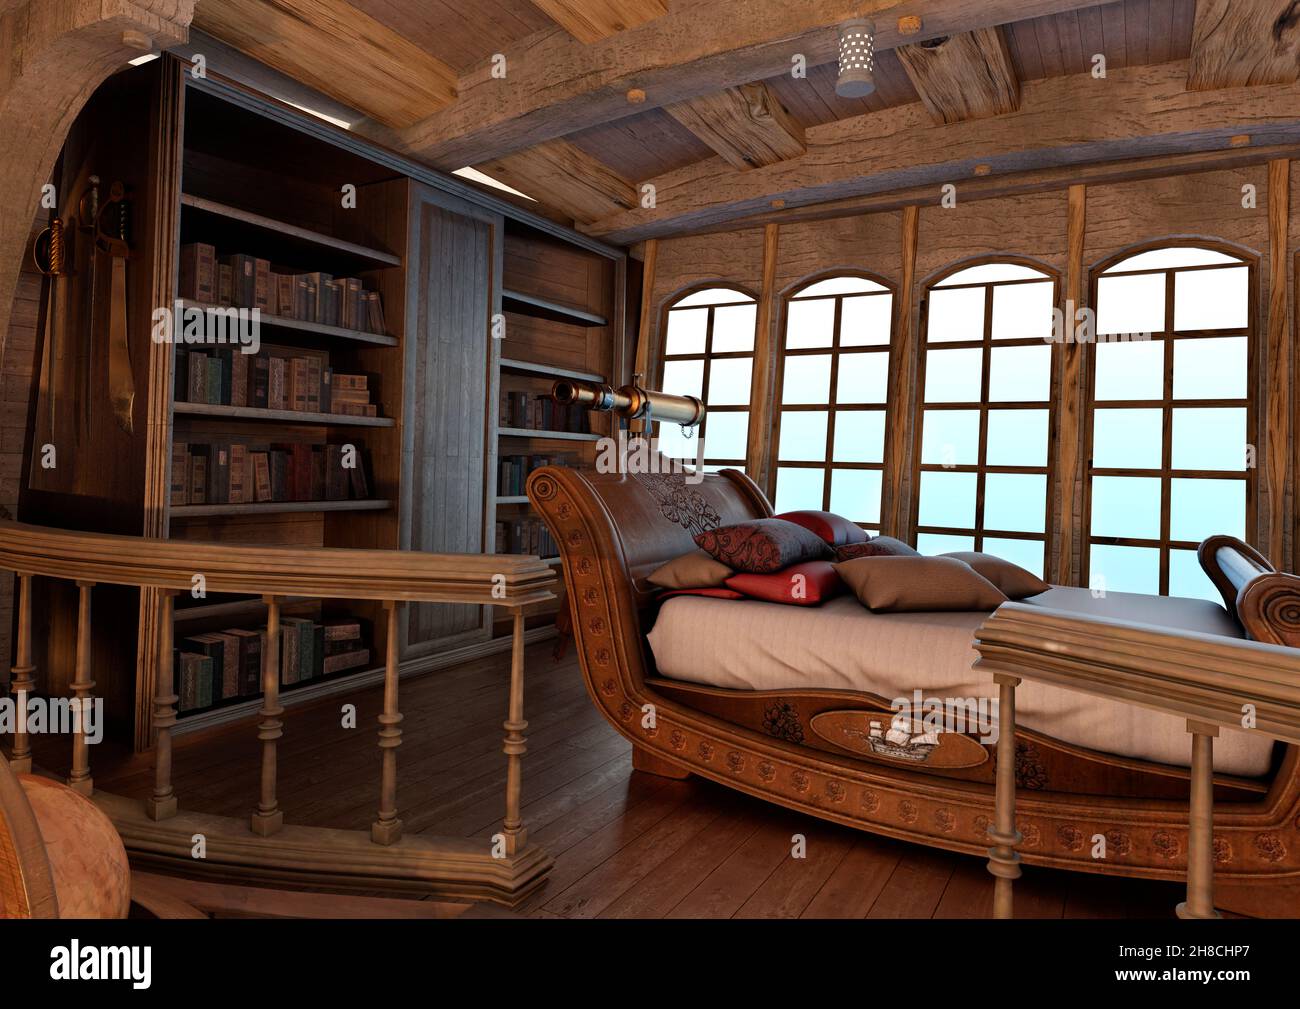 3D rendering of a vintage pirate cabin interior Stock Photo - Alamy